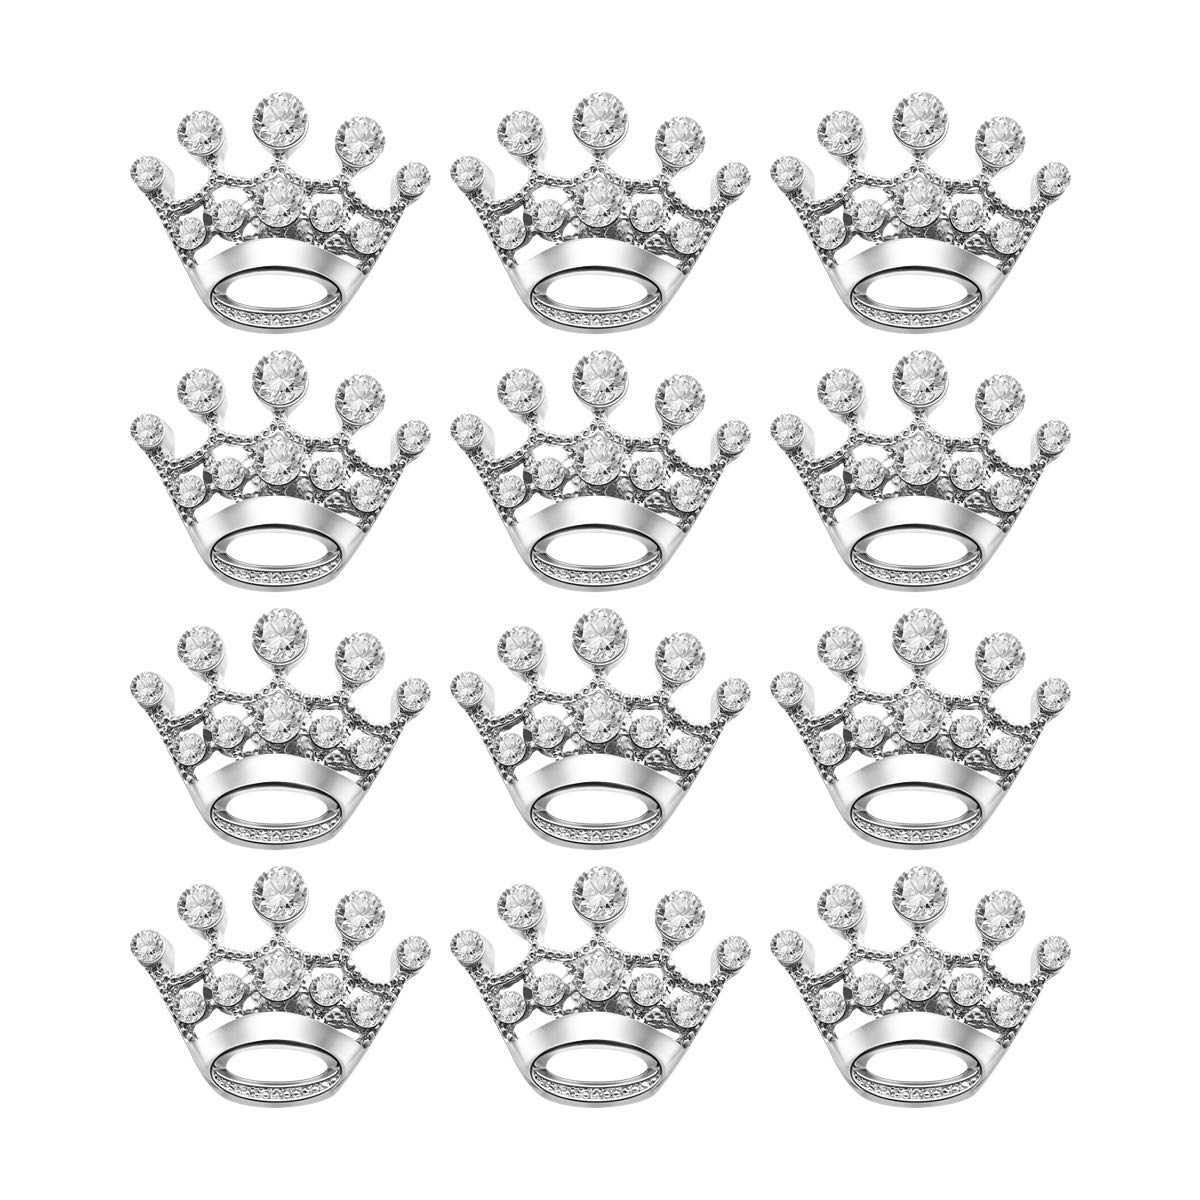 Book Cover Tinksky 12pcs Fashion Diamante Wedding Party Pageant Tiara Crown Corsage Brooch Pin for Wedding Valentine's Day Gift DIY (Silver)